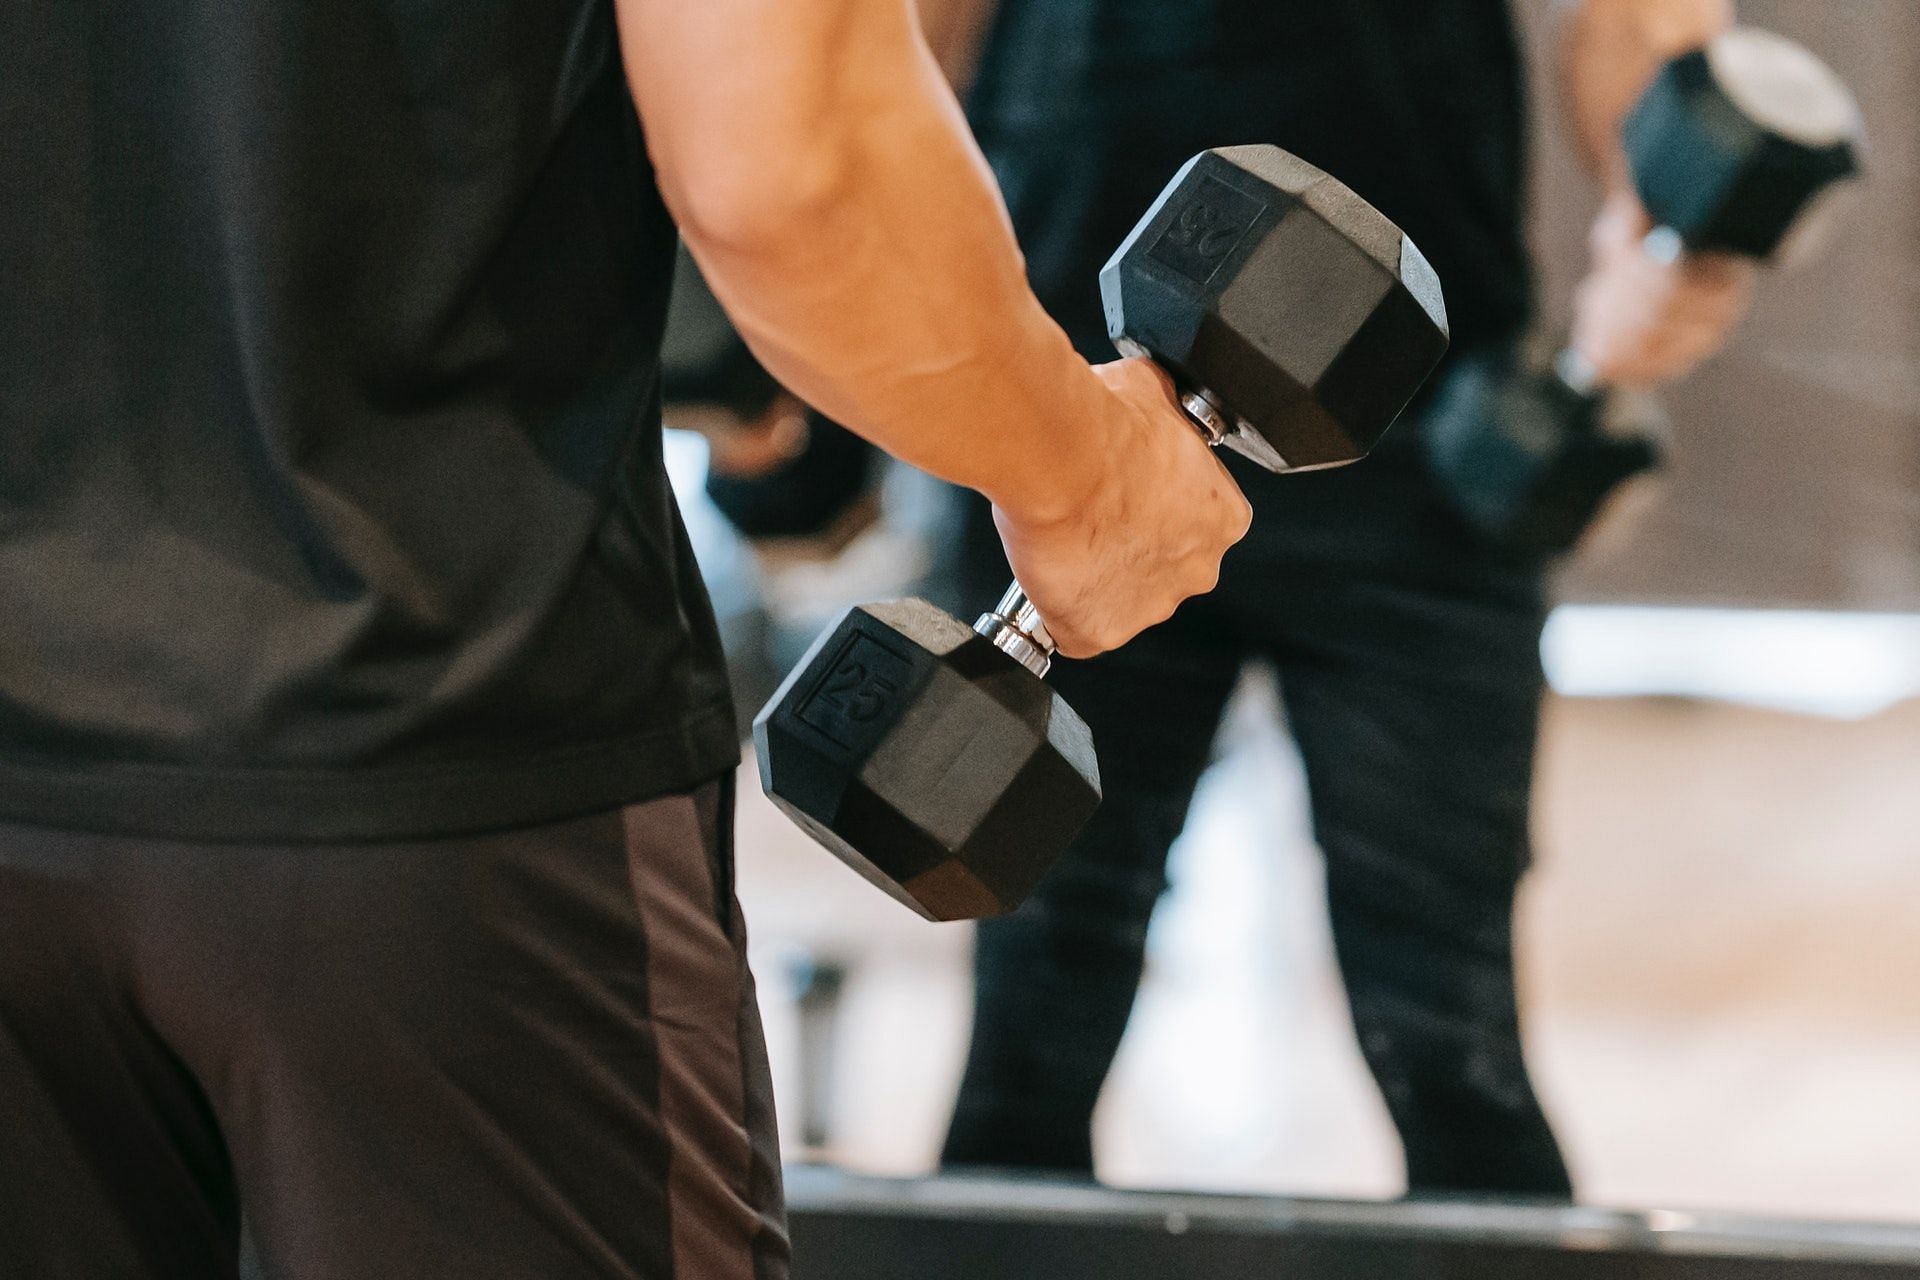 The right exercises prevent hip aches and improve hip mobility. (Photo by Andres Ayrton via pexels)